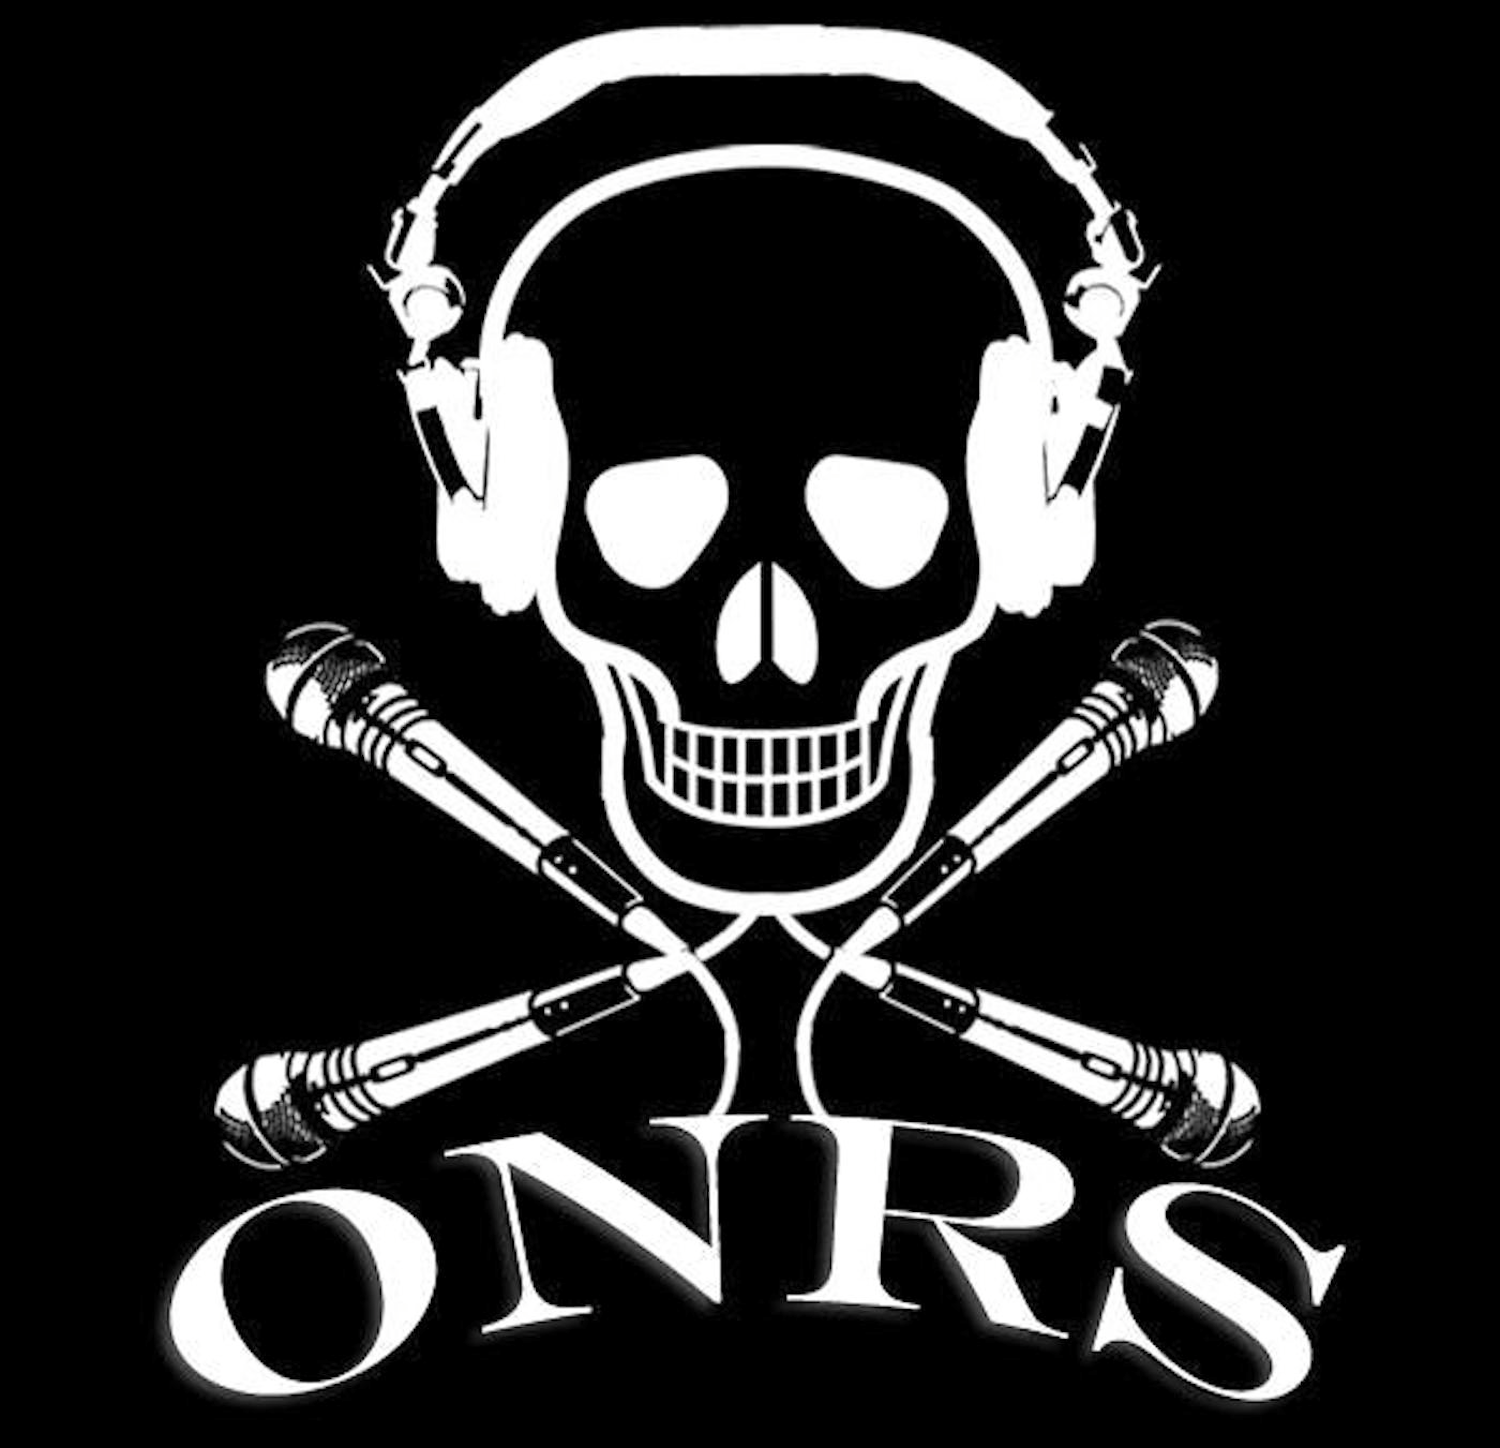 ONRS - EP357 - Nyquil Dreams and Frozen Bananas